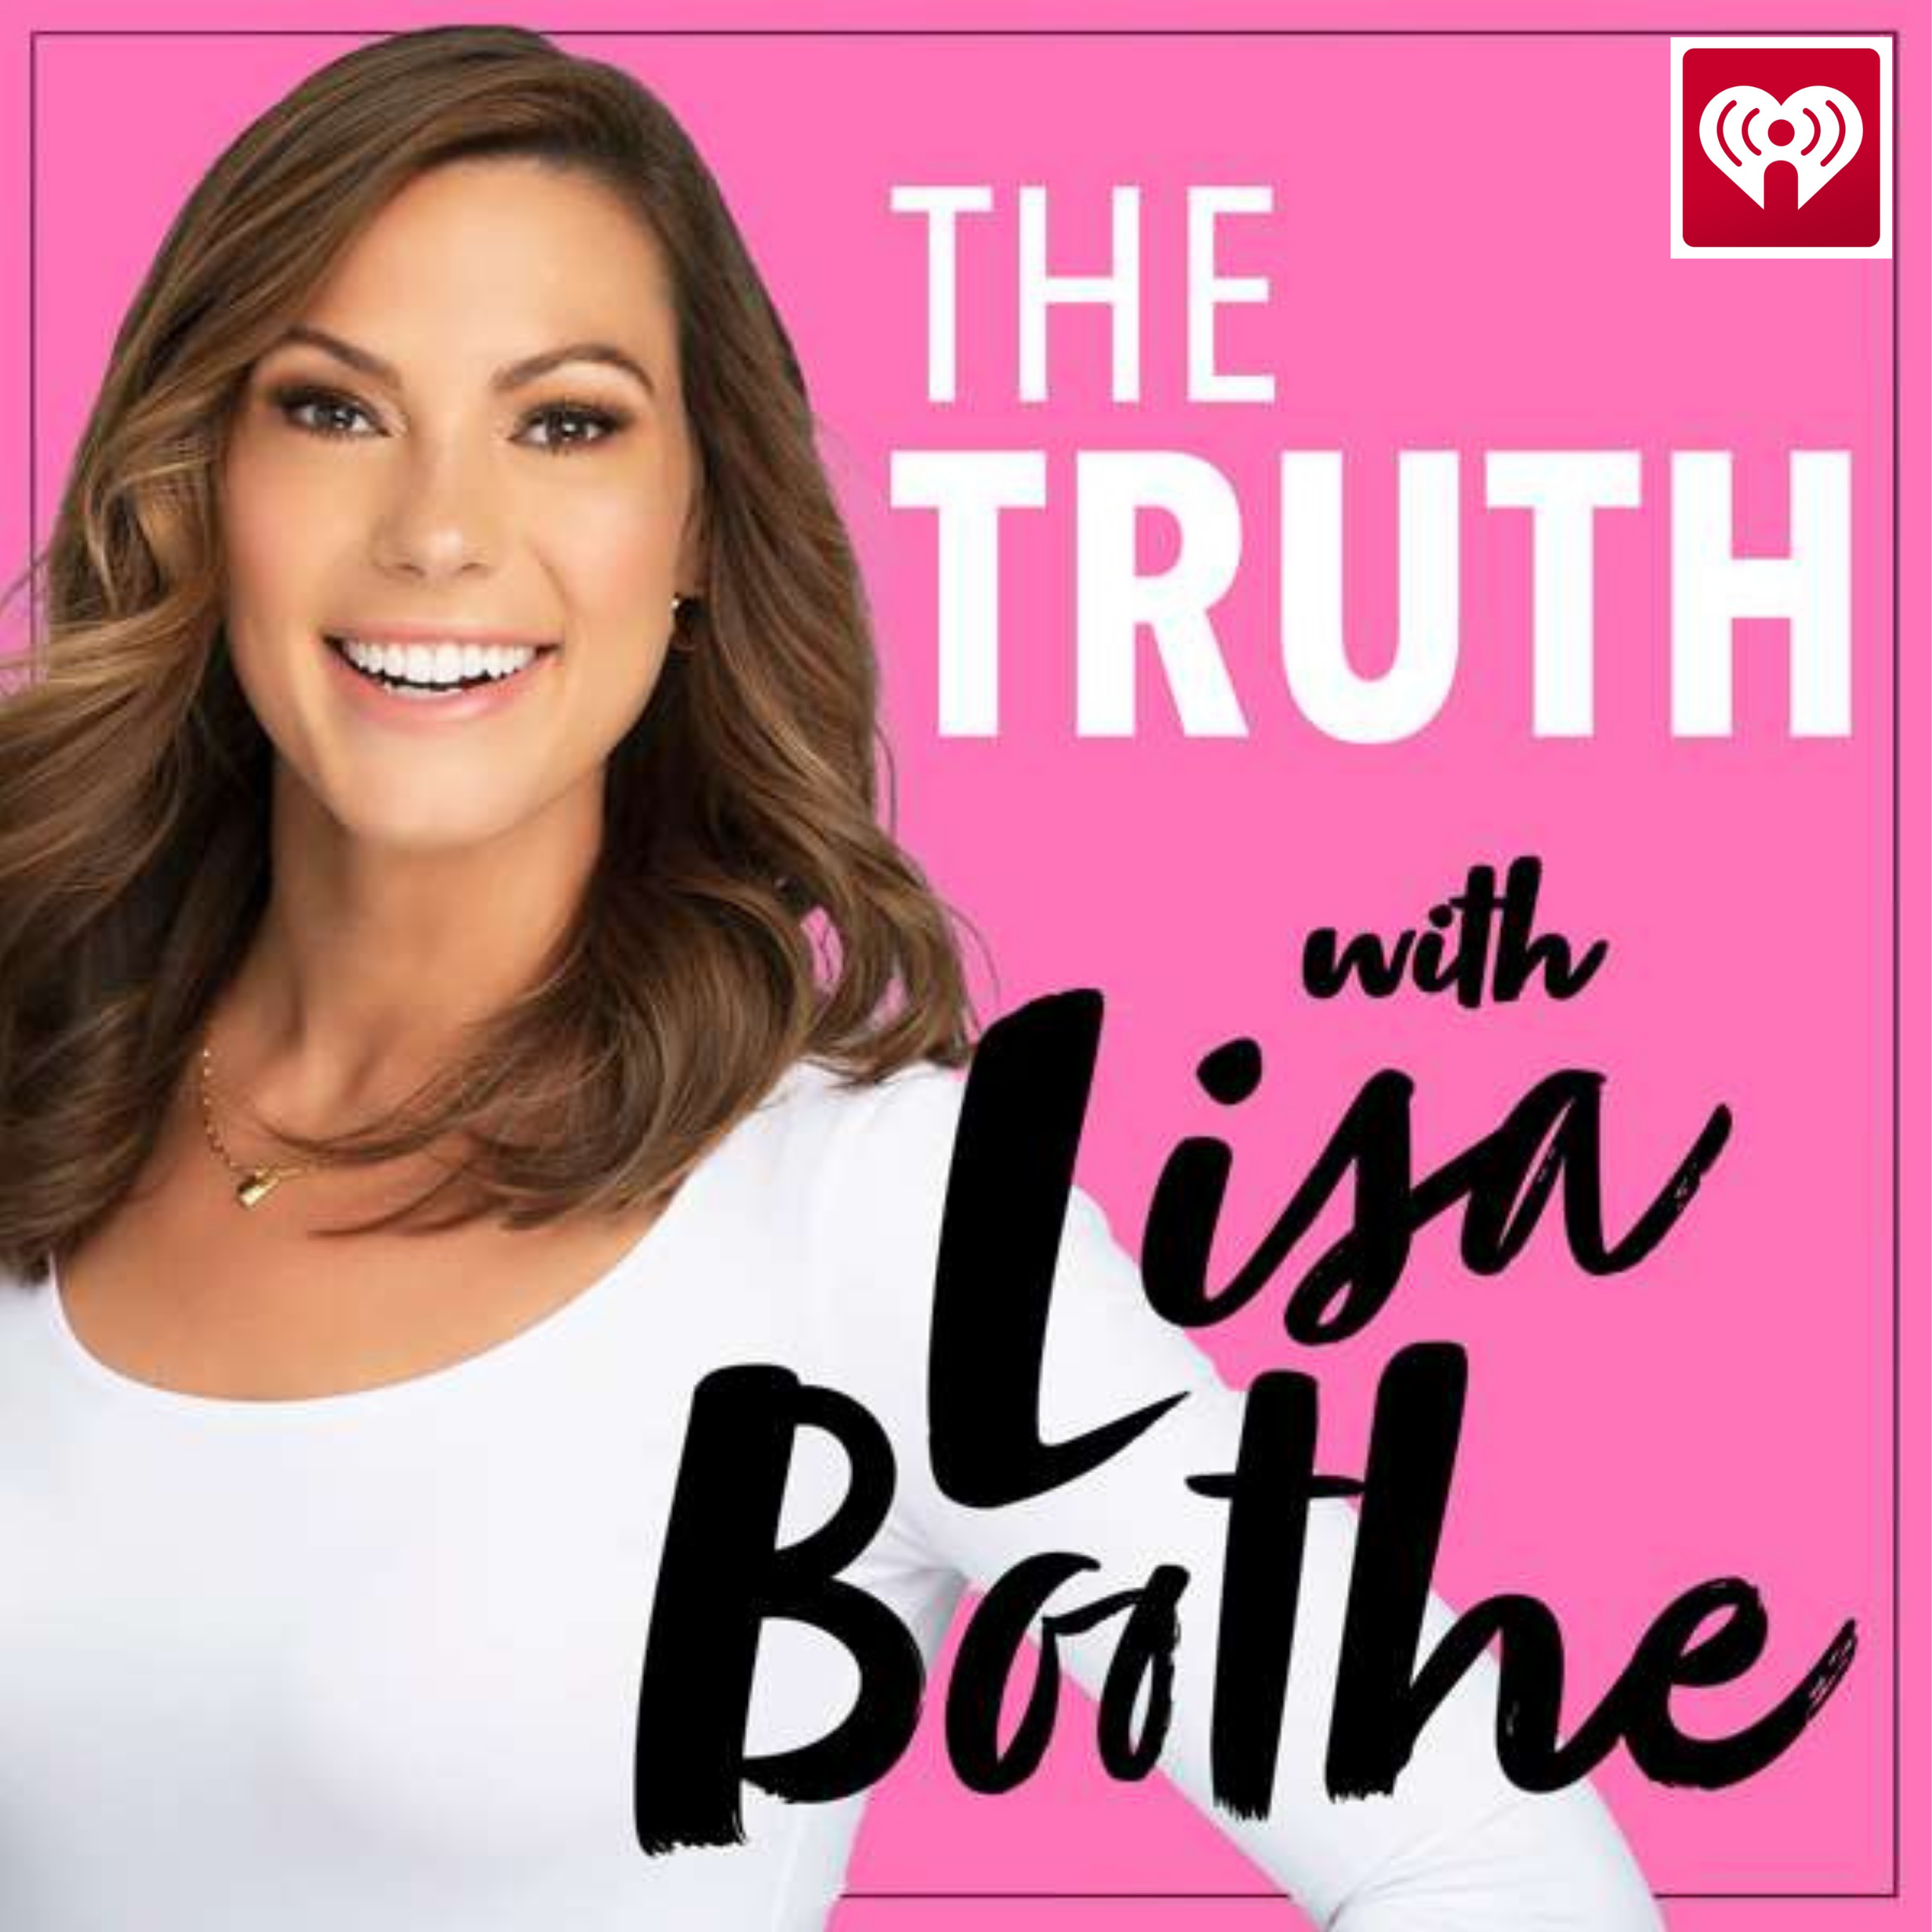 The Truth with Lisa Boothe: A Radical Left Judicial System vs. Donald Trump with Andy McCarthy